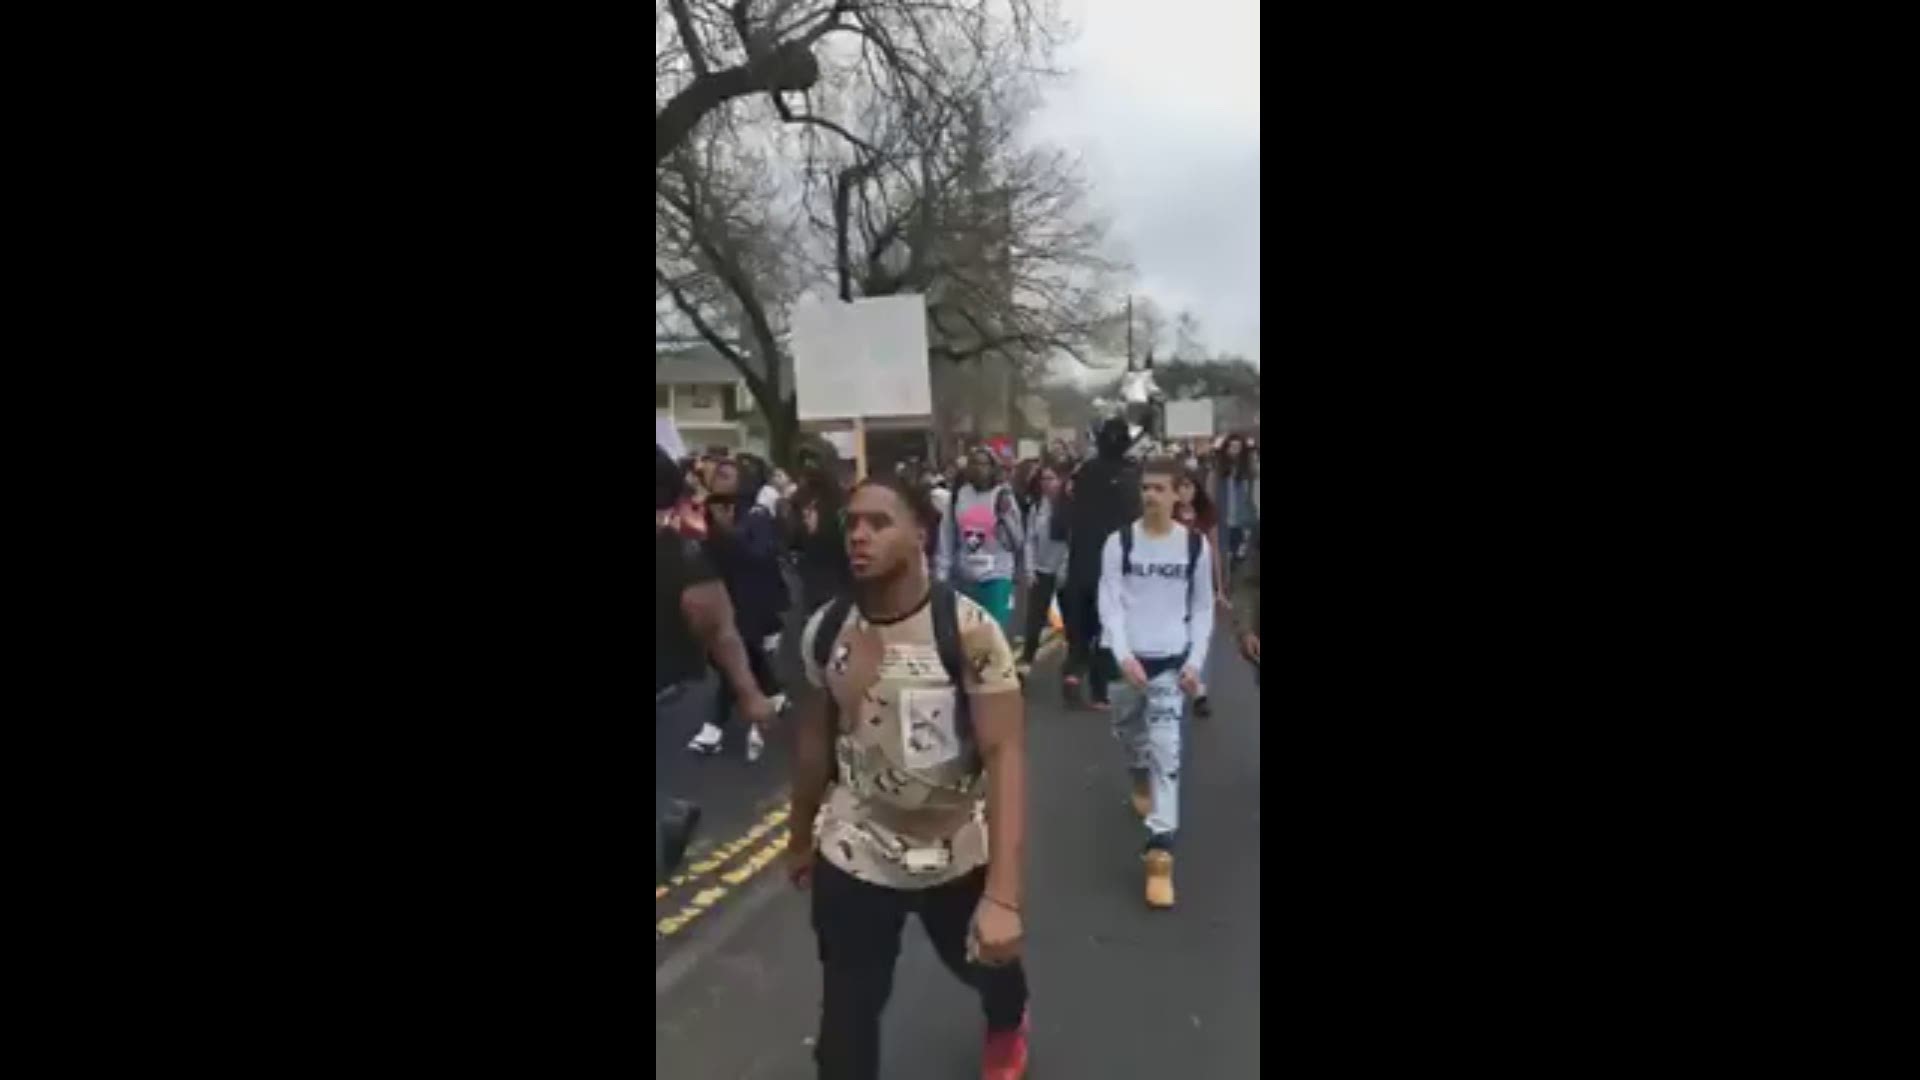 Students from both McClatchy High School and Sac City College have walked out of school, in protest of the Sacramento County District Attorney's decision not to criminally charge the two officers for the shooting death of Stephon Clark.